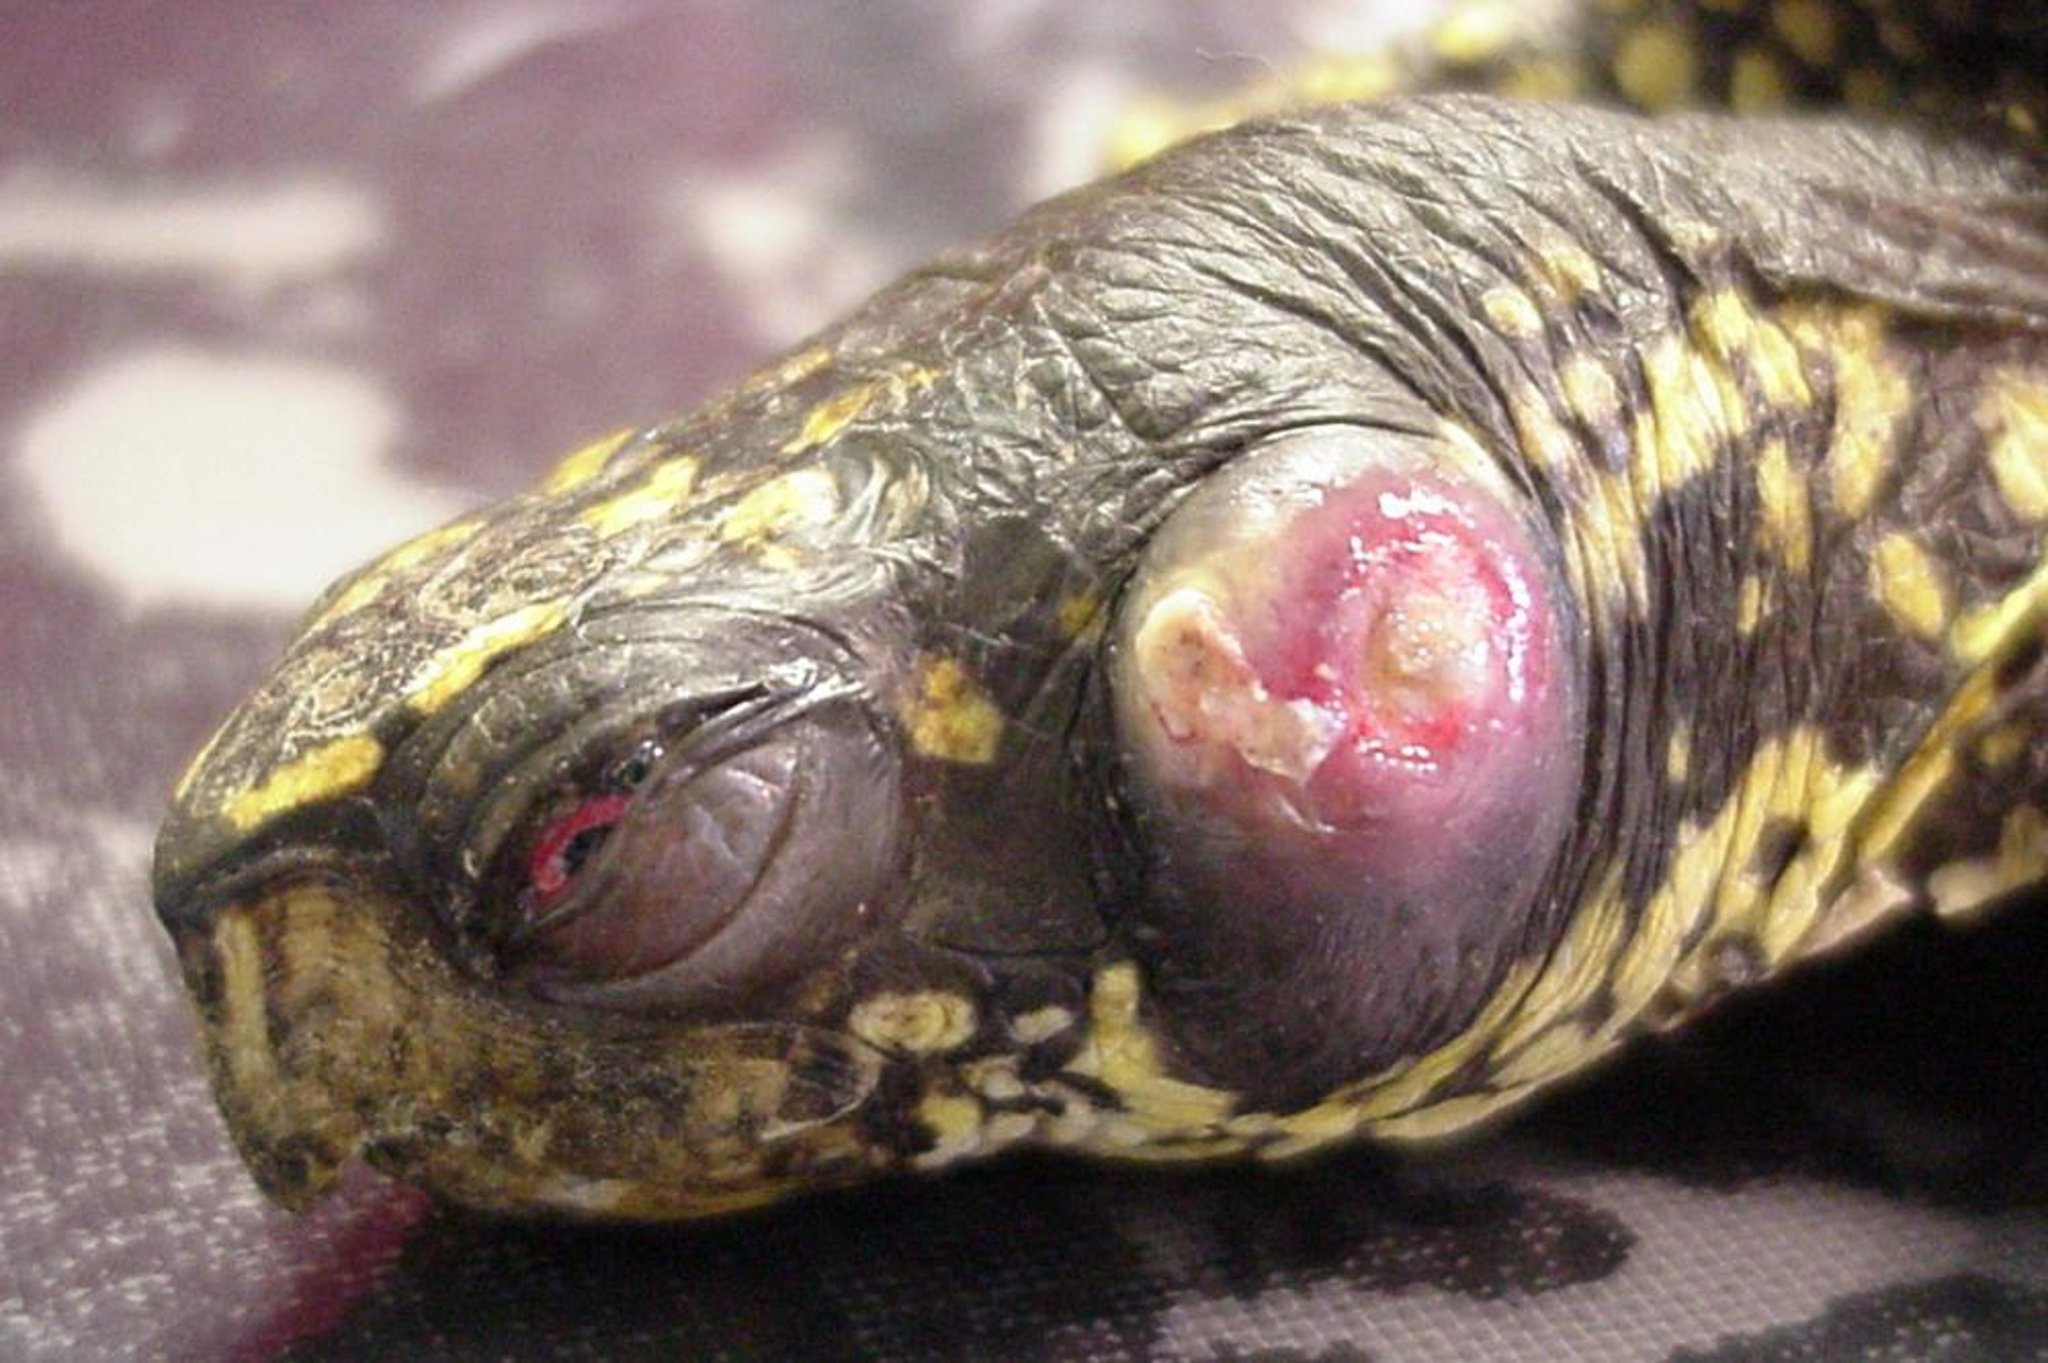 Aural abscess, Chinese box turtle